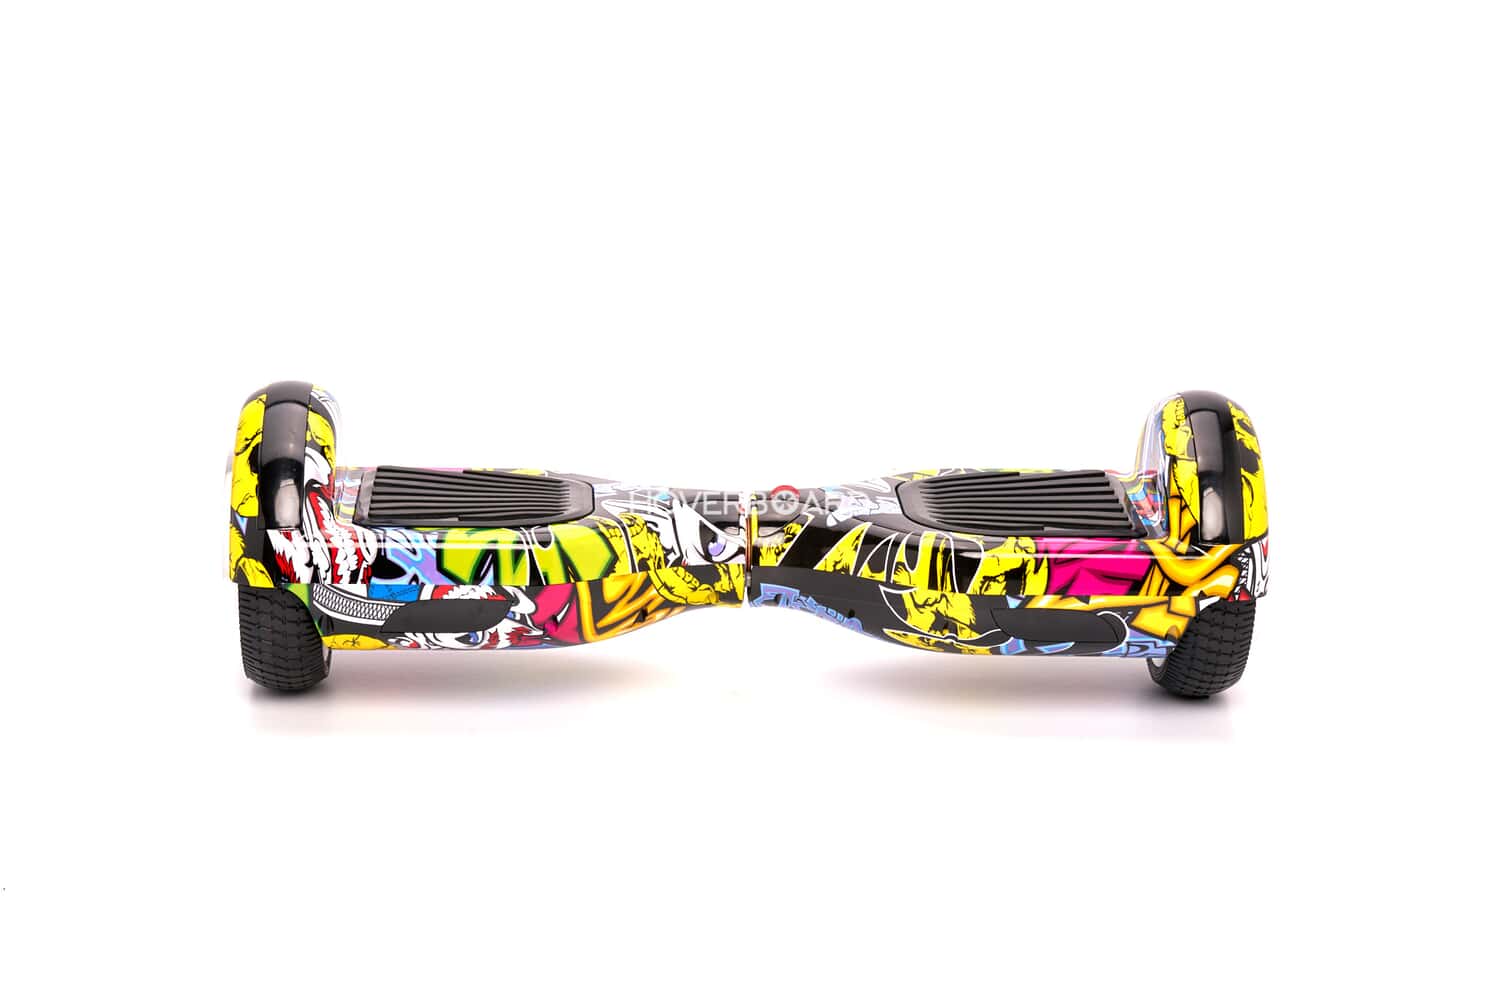 https://winetyph.sirv.com/hoverboards/M1X/M1X%20Hip%20Hop/Hoverboard-360-300236.jpg?scale.option=fill&scale.width=1500&watermark.0.image=%2Fhoverboards%2Fwatermark%2Fhoverboards.png&watermark.0.scale.width=240&quality=60